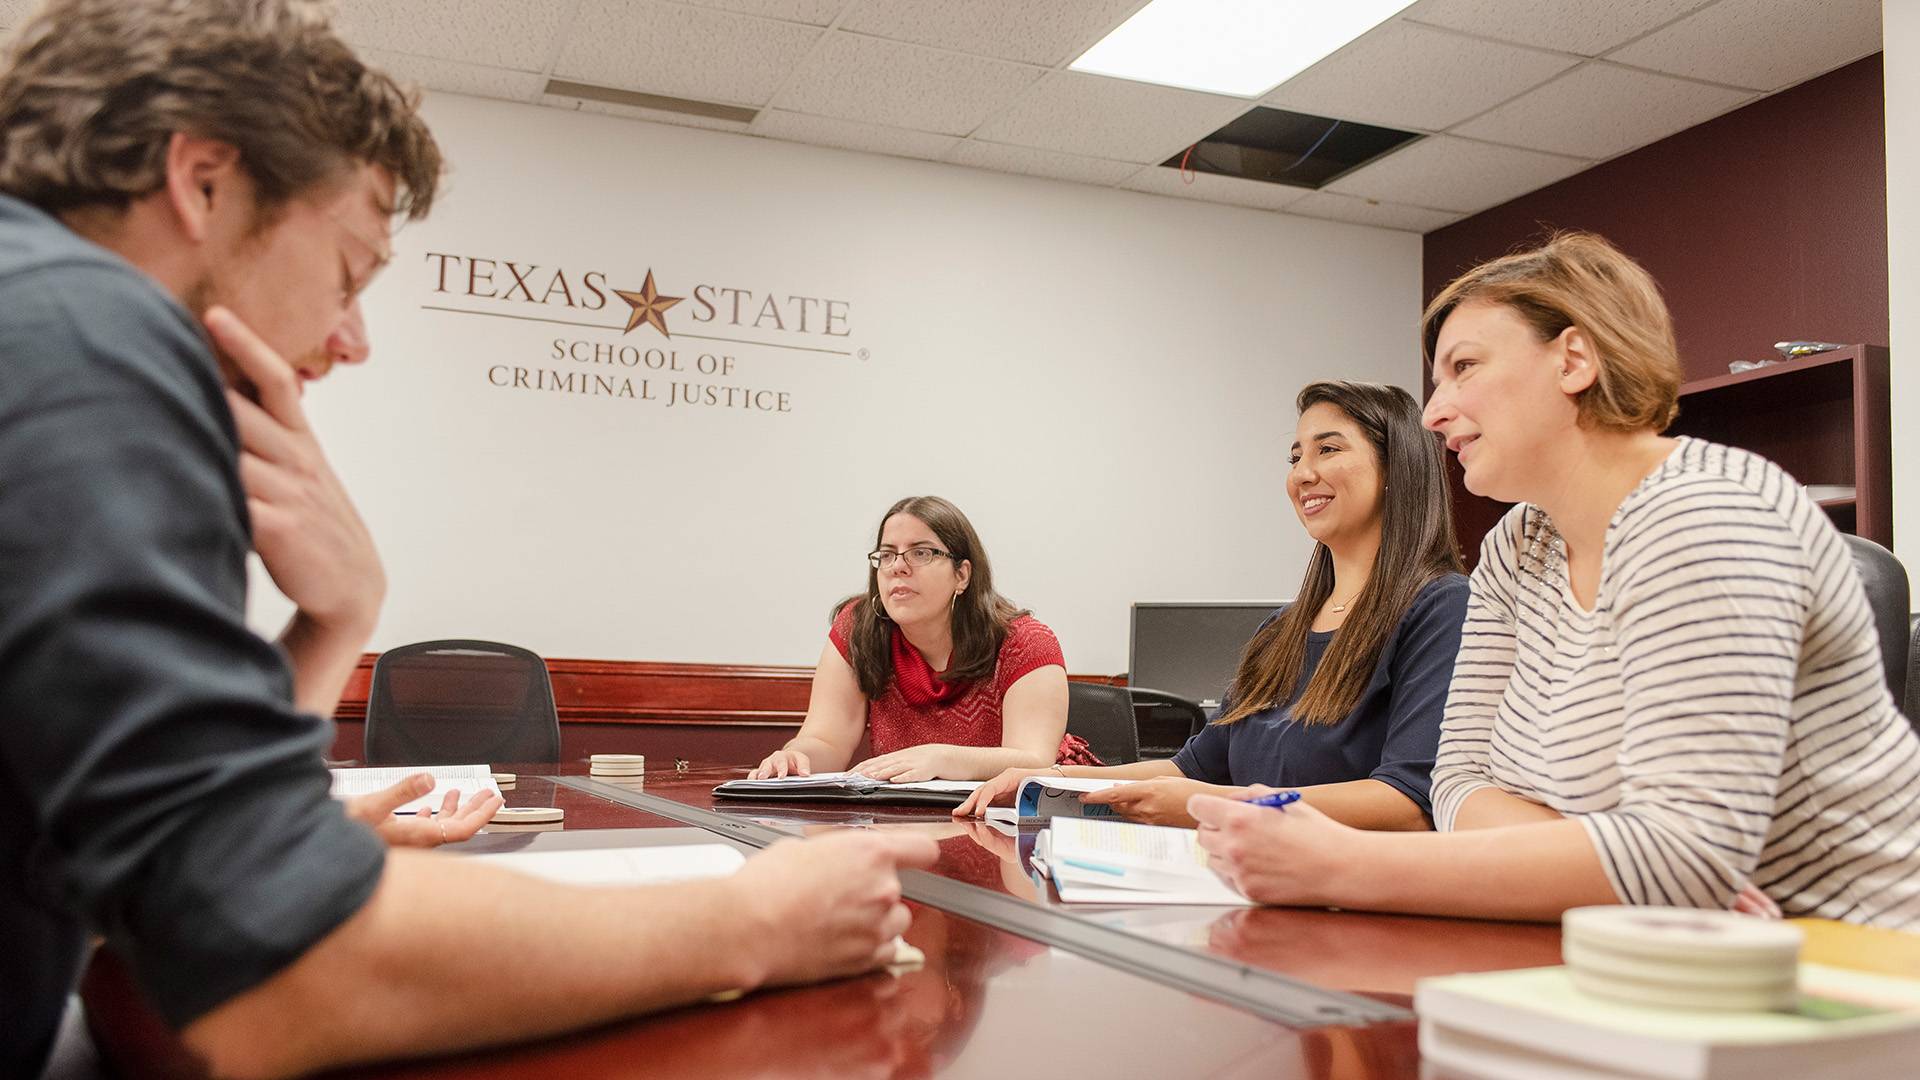 Group of four people at a conference room table with a Texas State School of Criminal Justice logo on the wall